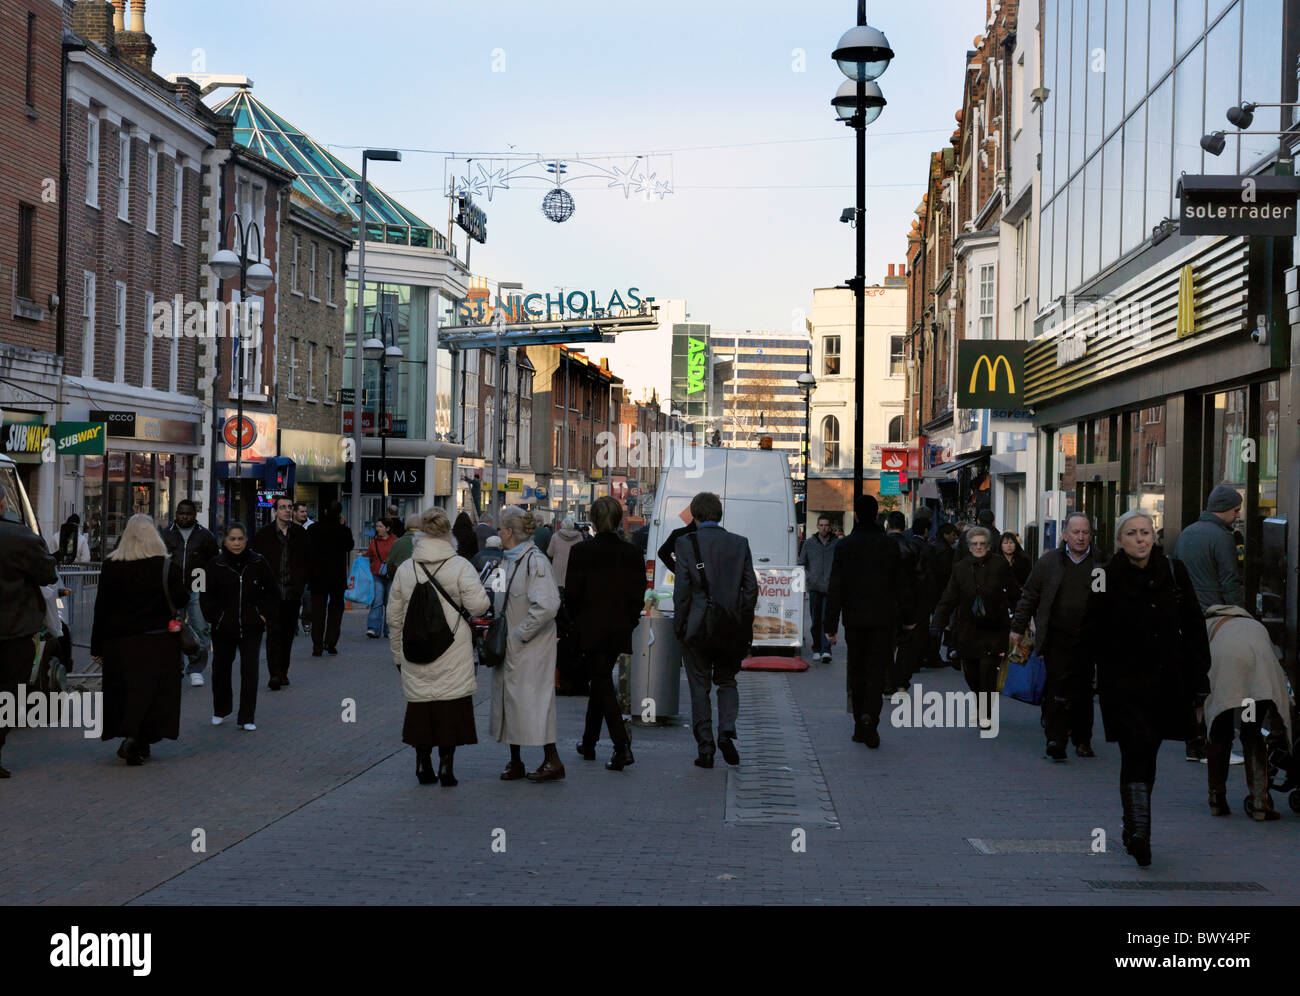 Sutton Surrey England Busy High Street With Crowds Of People And Shops Stock Photo